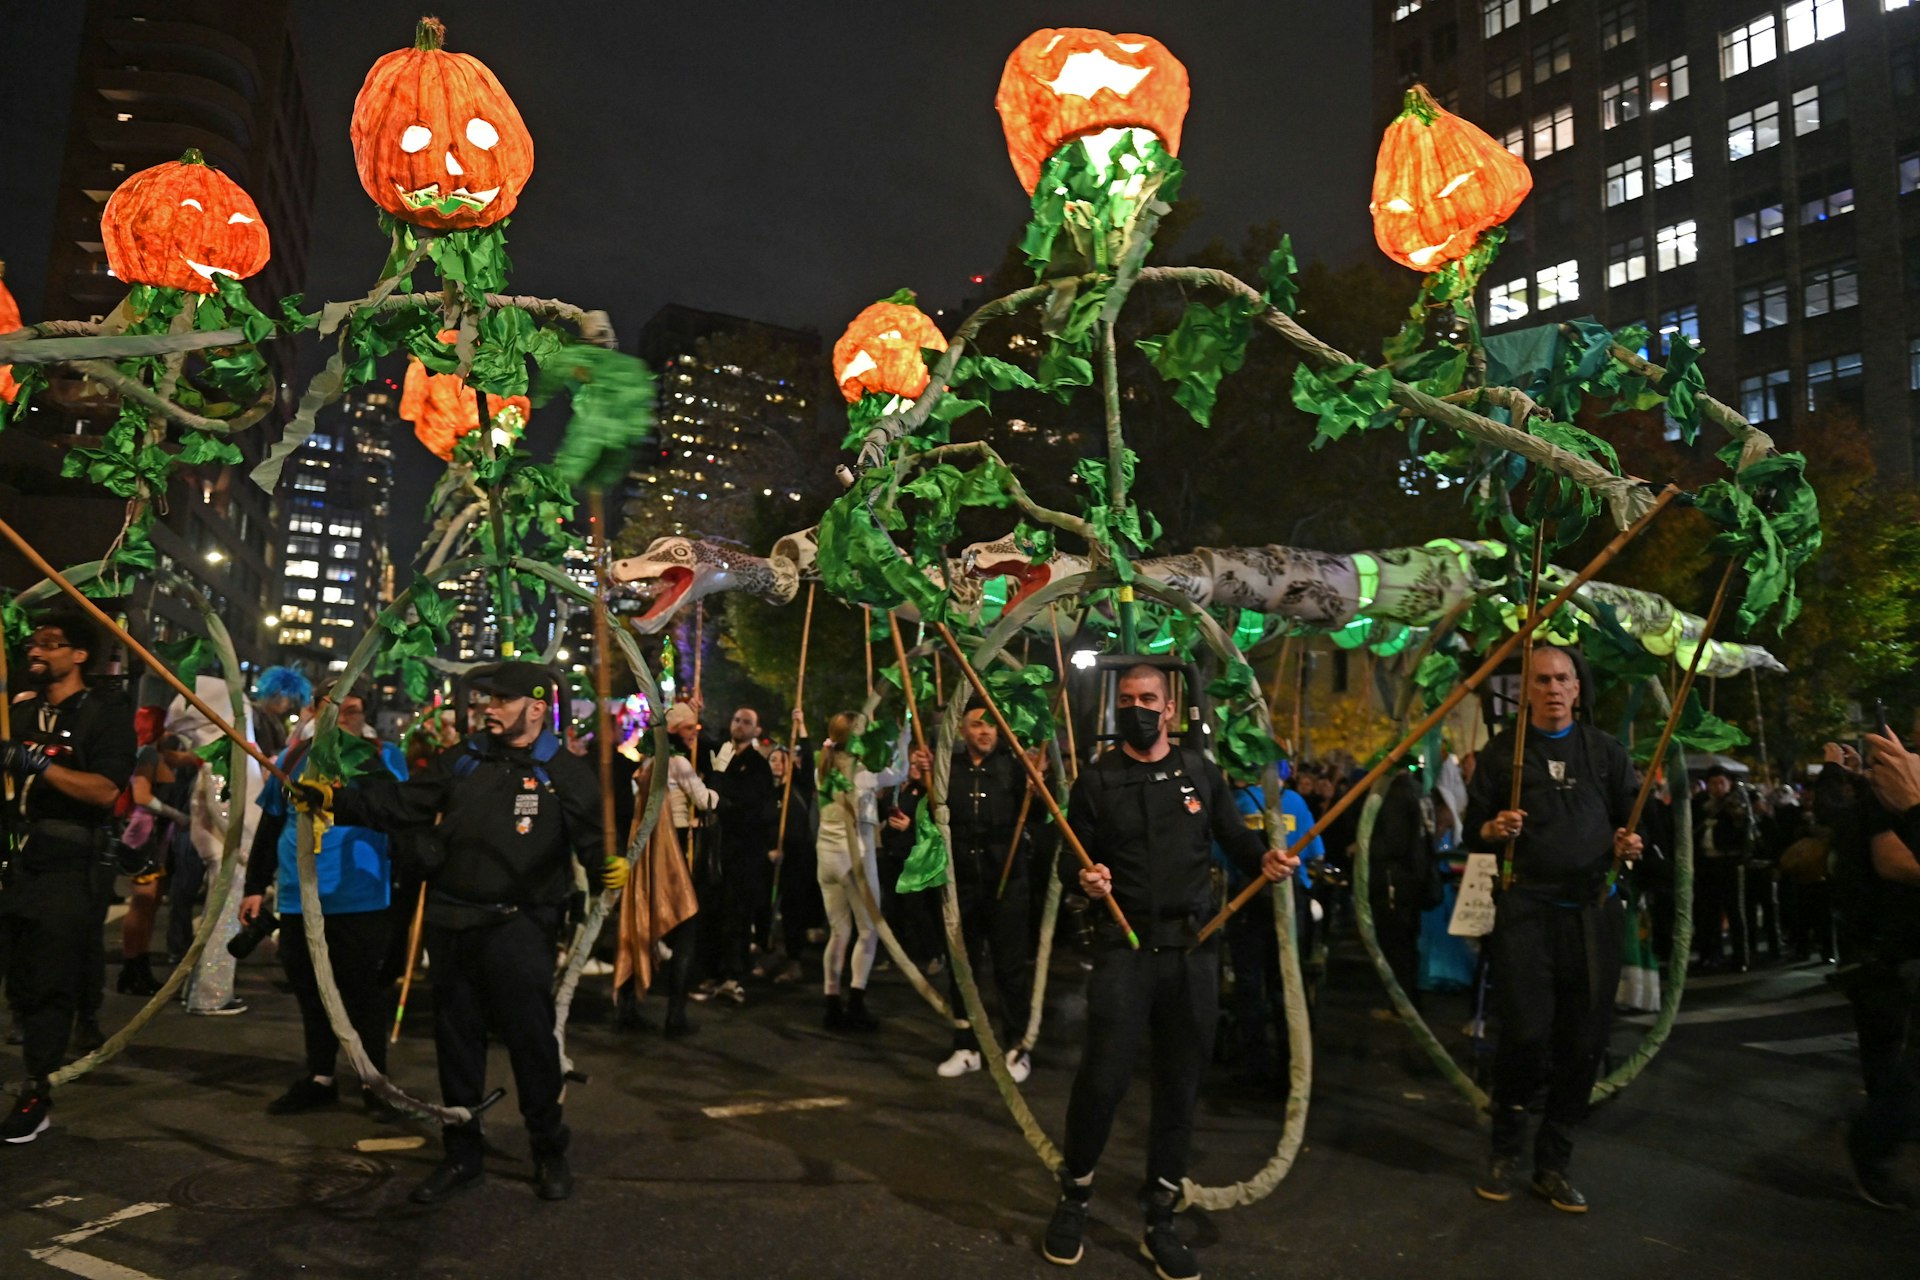 Revellers march in costumes during the 49th Annual Halloween parade in Greenwich Village, New York, New York, USA